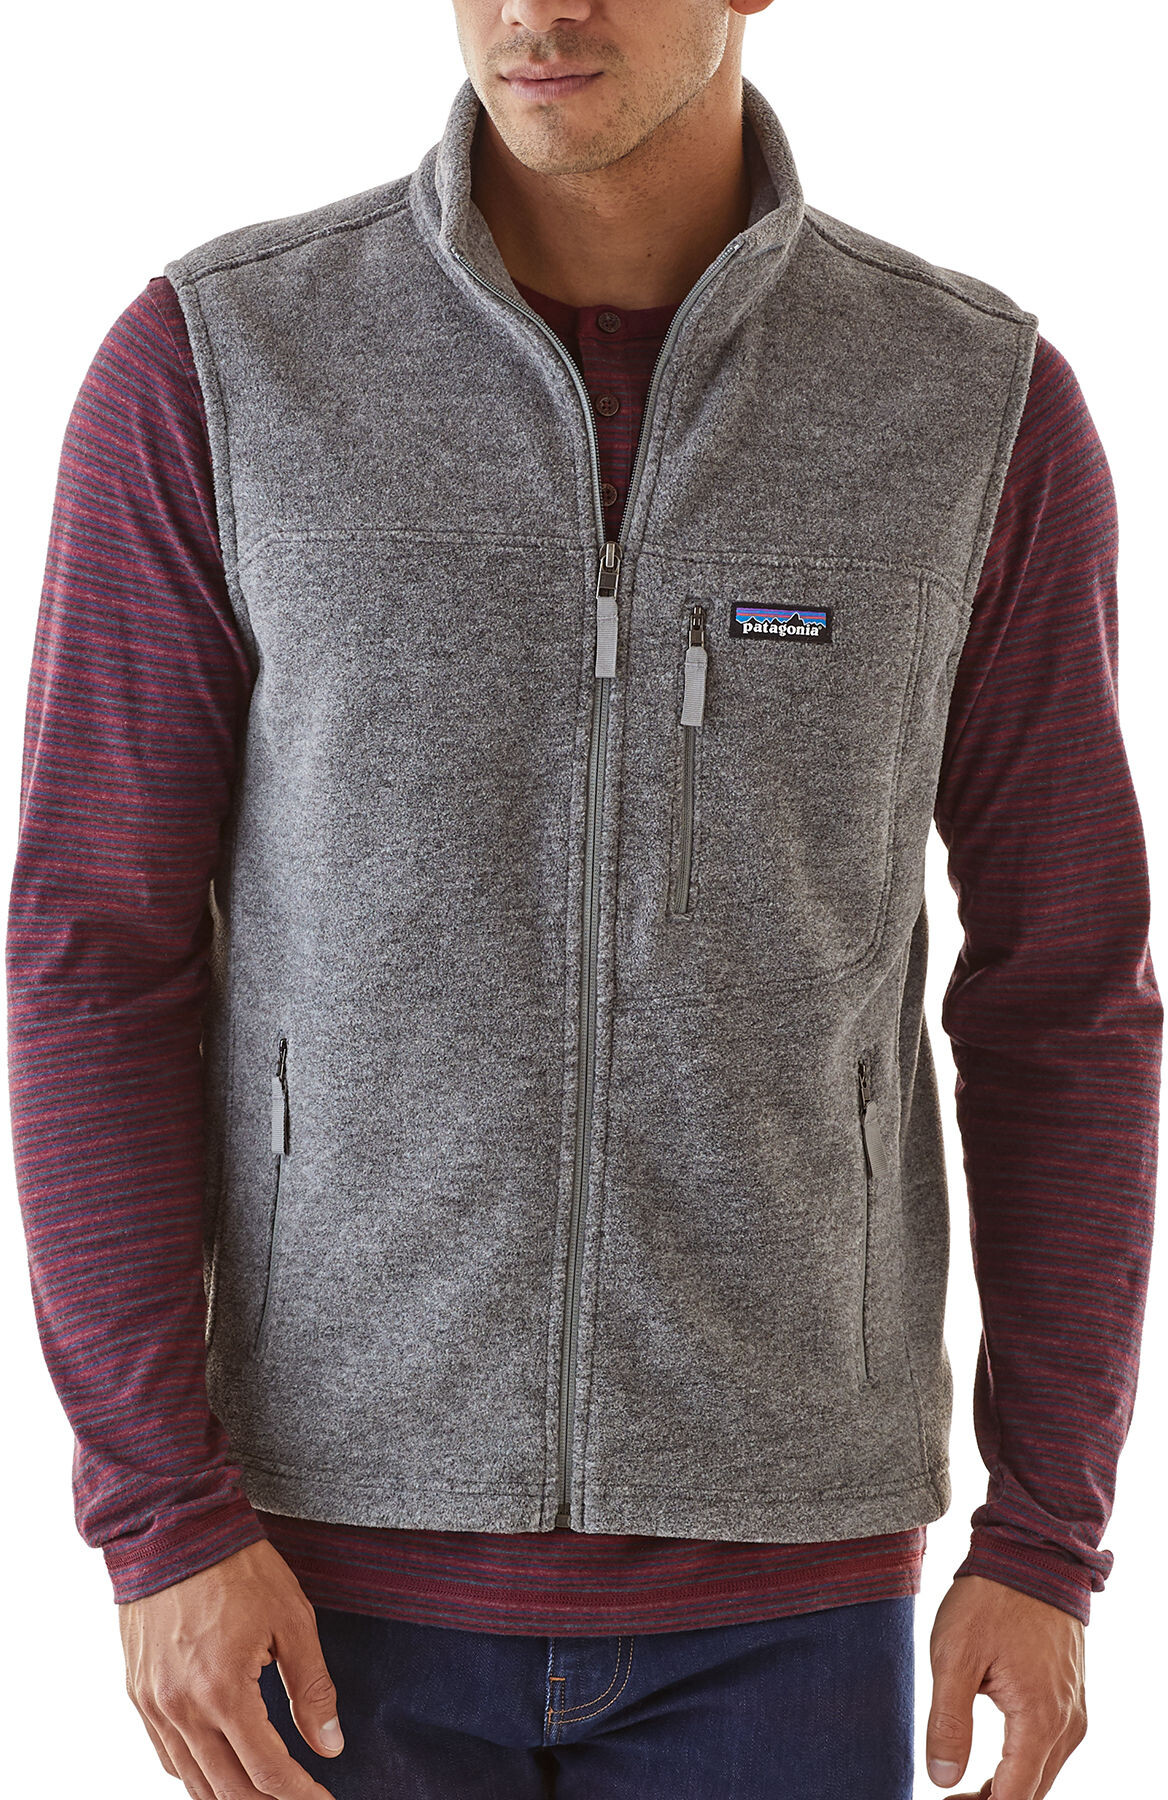 Patagonia Classic Synch Vest Men nickel | Addnature.co.uk